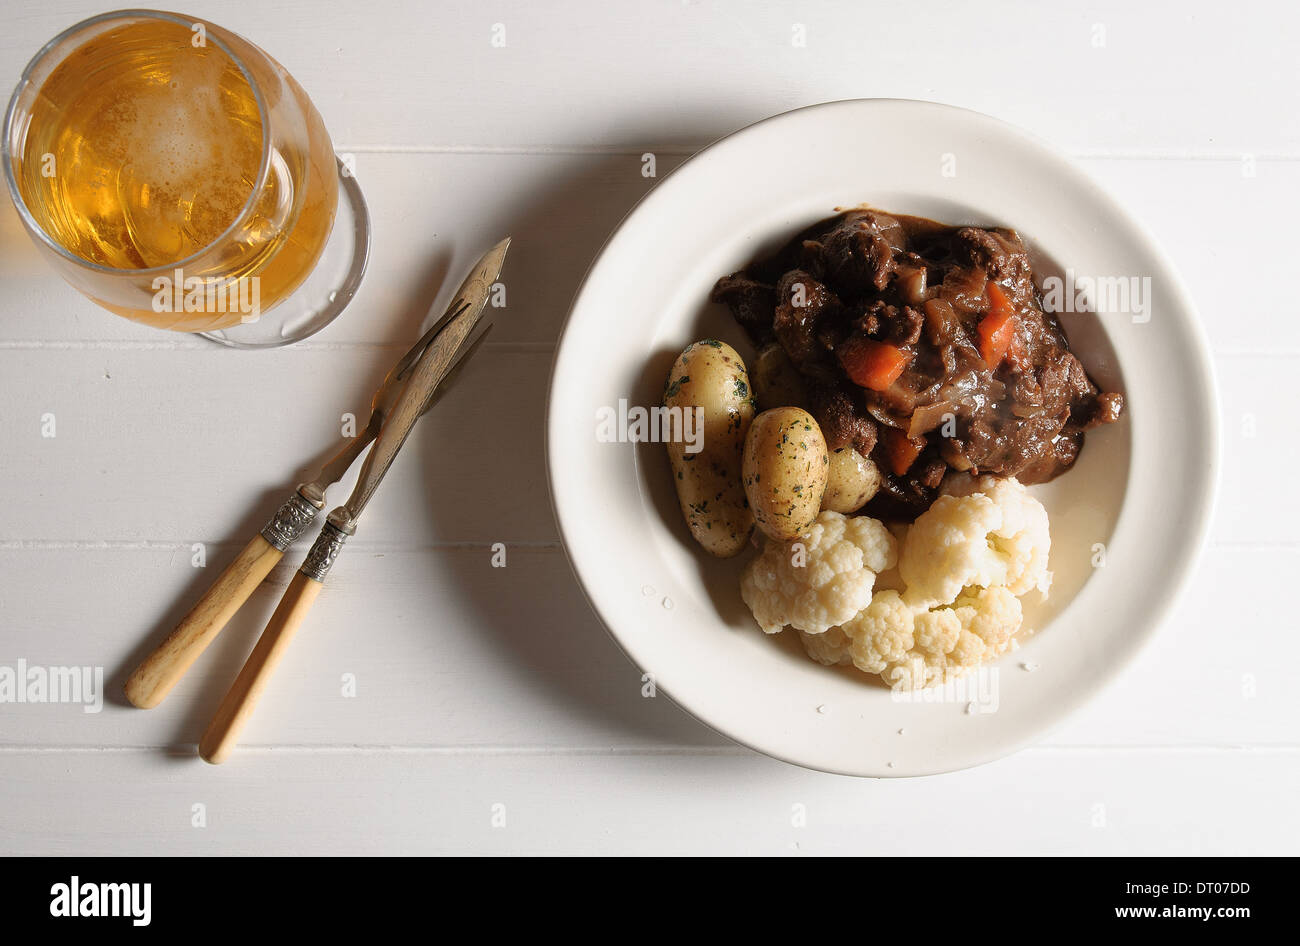 Meat stew and a pint of beer. Stock Photo